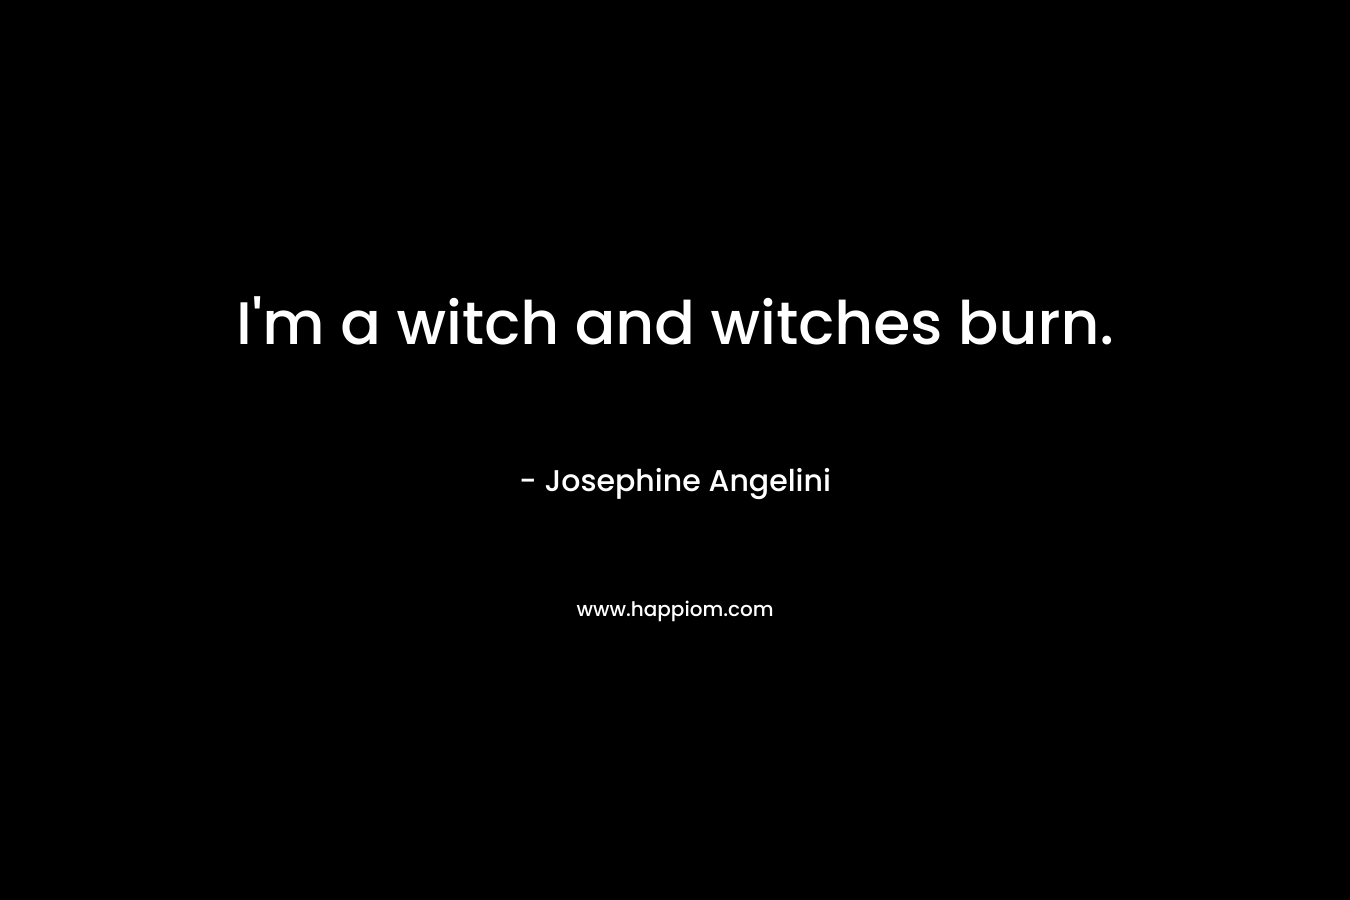 I’m a witch and witches burn. – Josephine Angelini